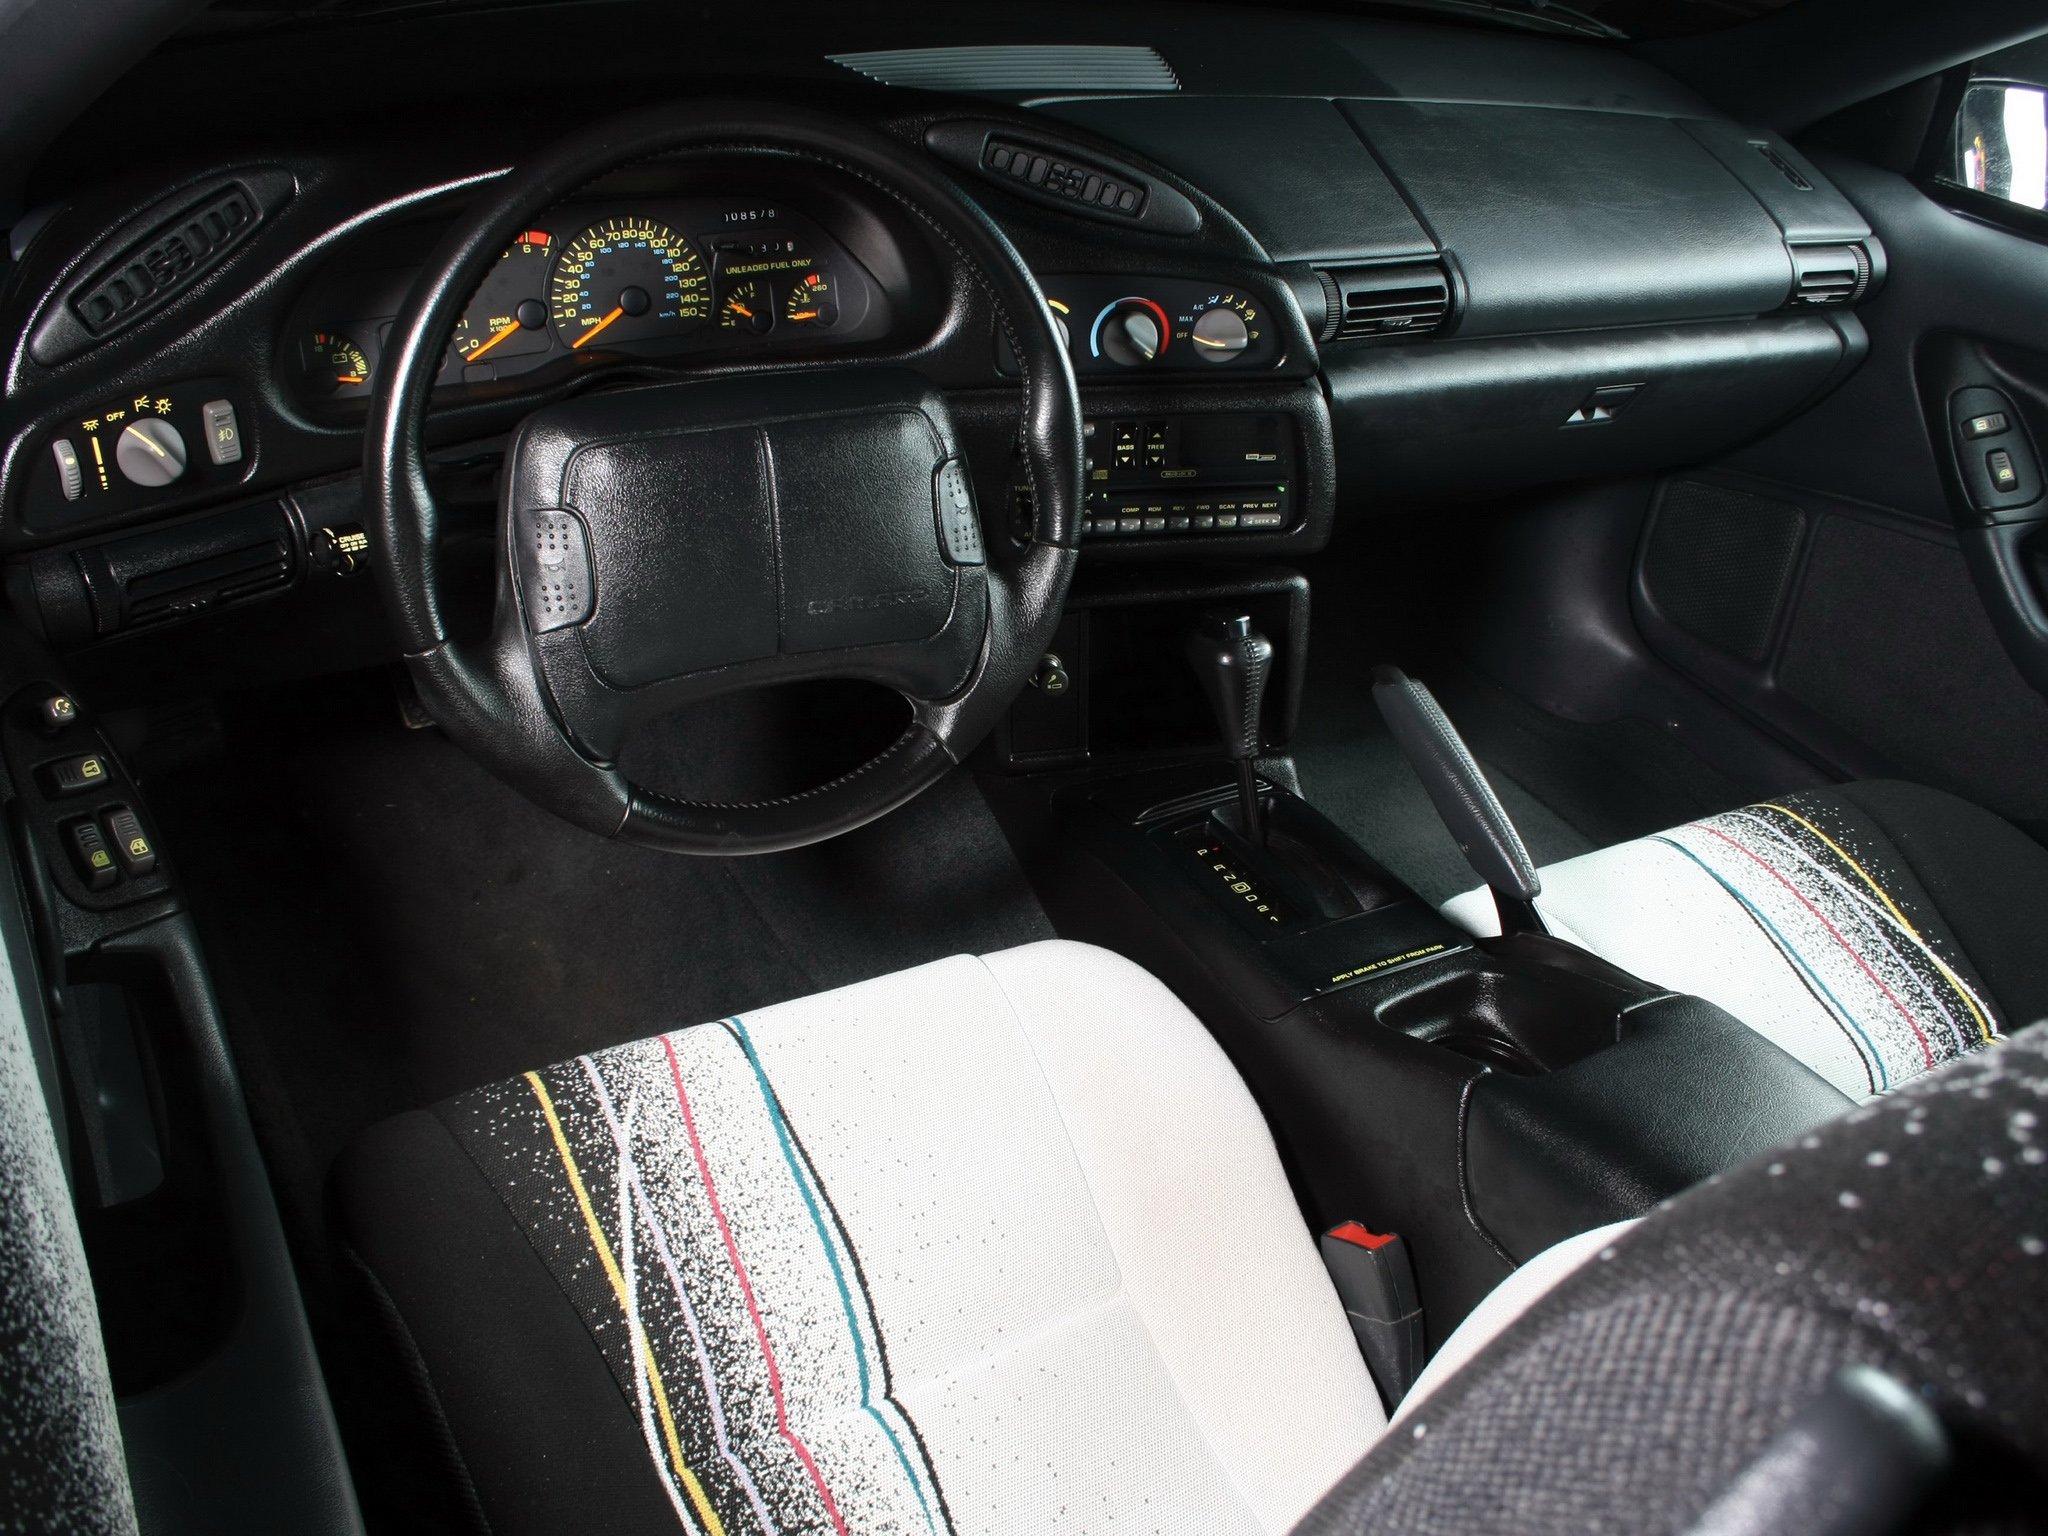 1993, Chevrolet, Camaro, Z28, Indy, 500, Pace, Muscle, Race, Racing, Interior Wallpaper